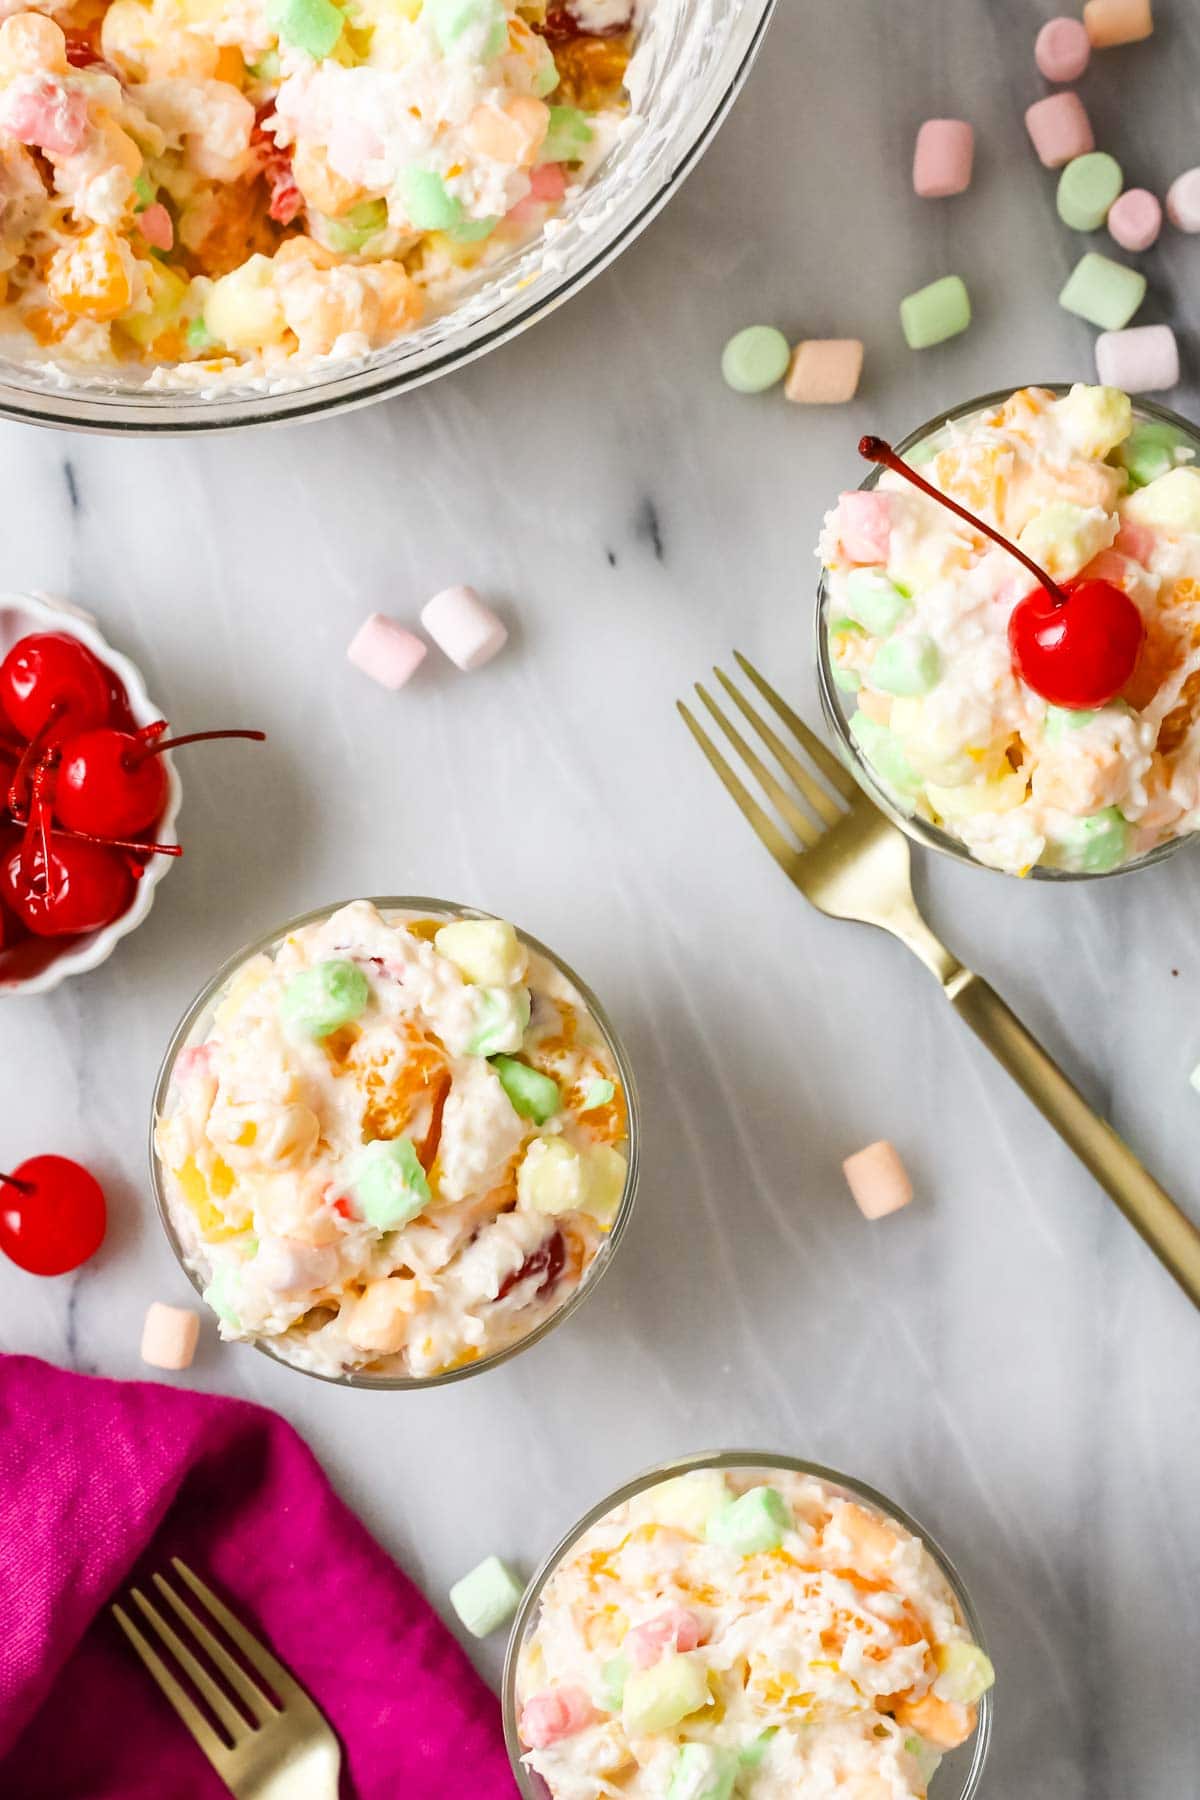 Overhead view of bowls of a fruit and marshmallow salad made with homemade whipped cream.